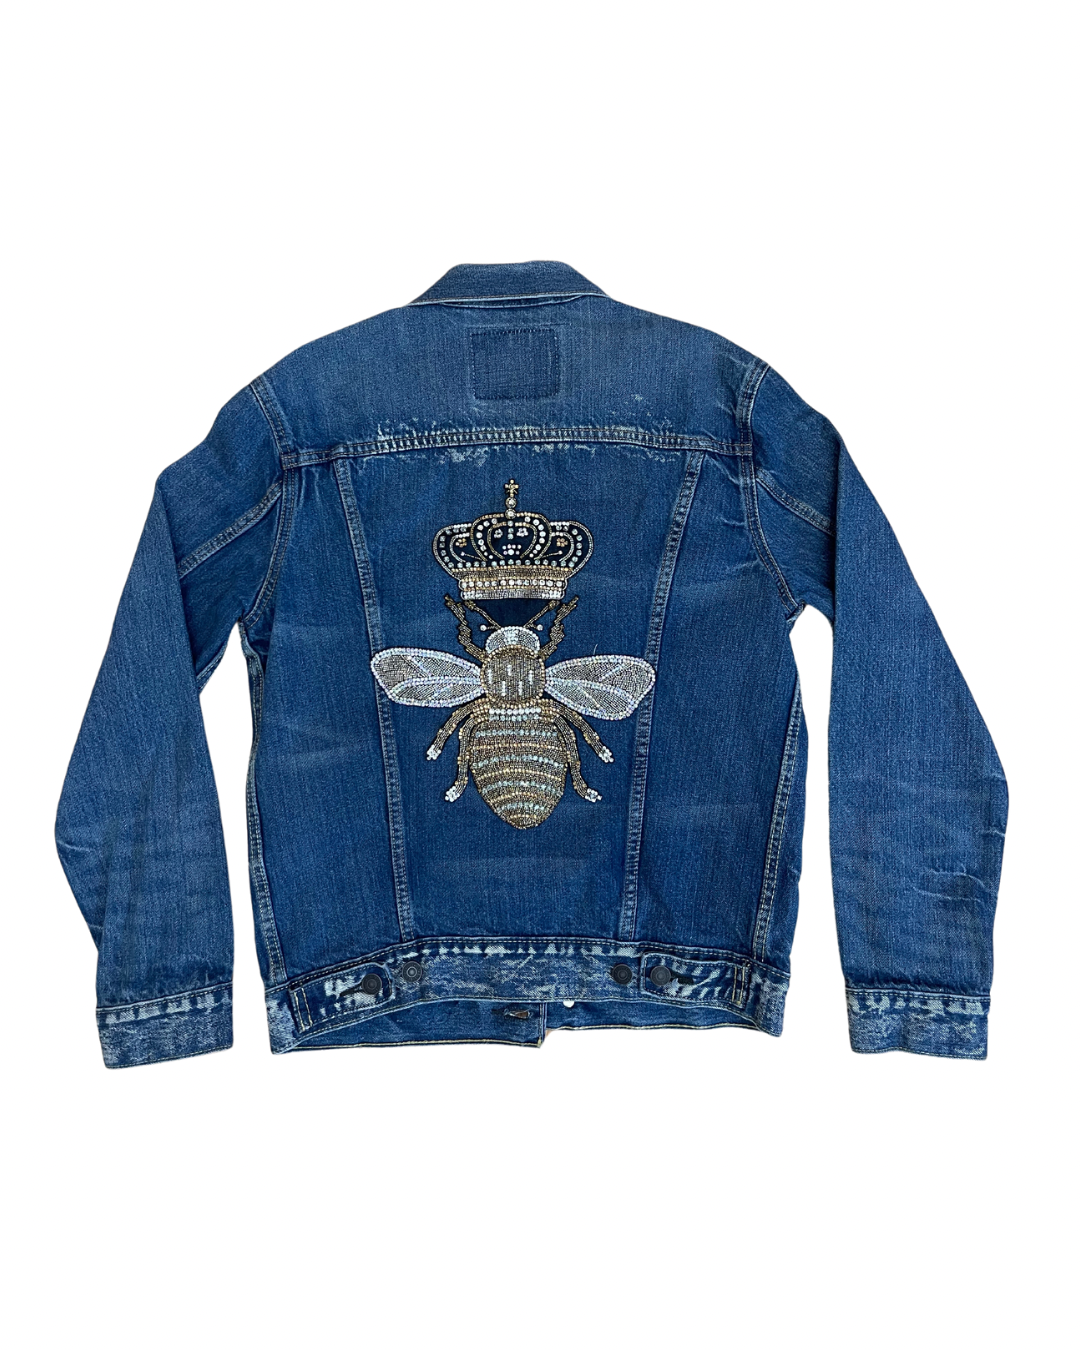 Upcycled Denim Jacket Queen Bee Patch